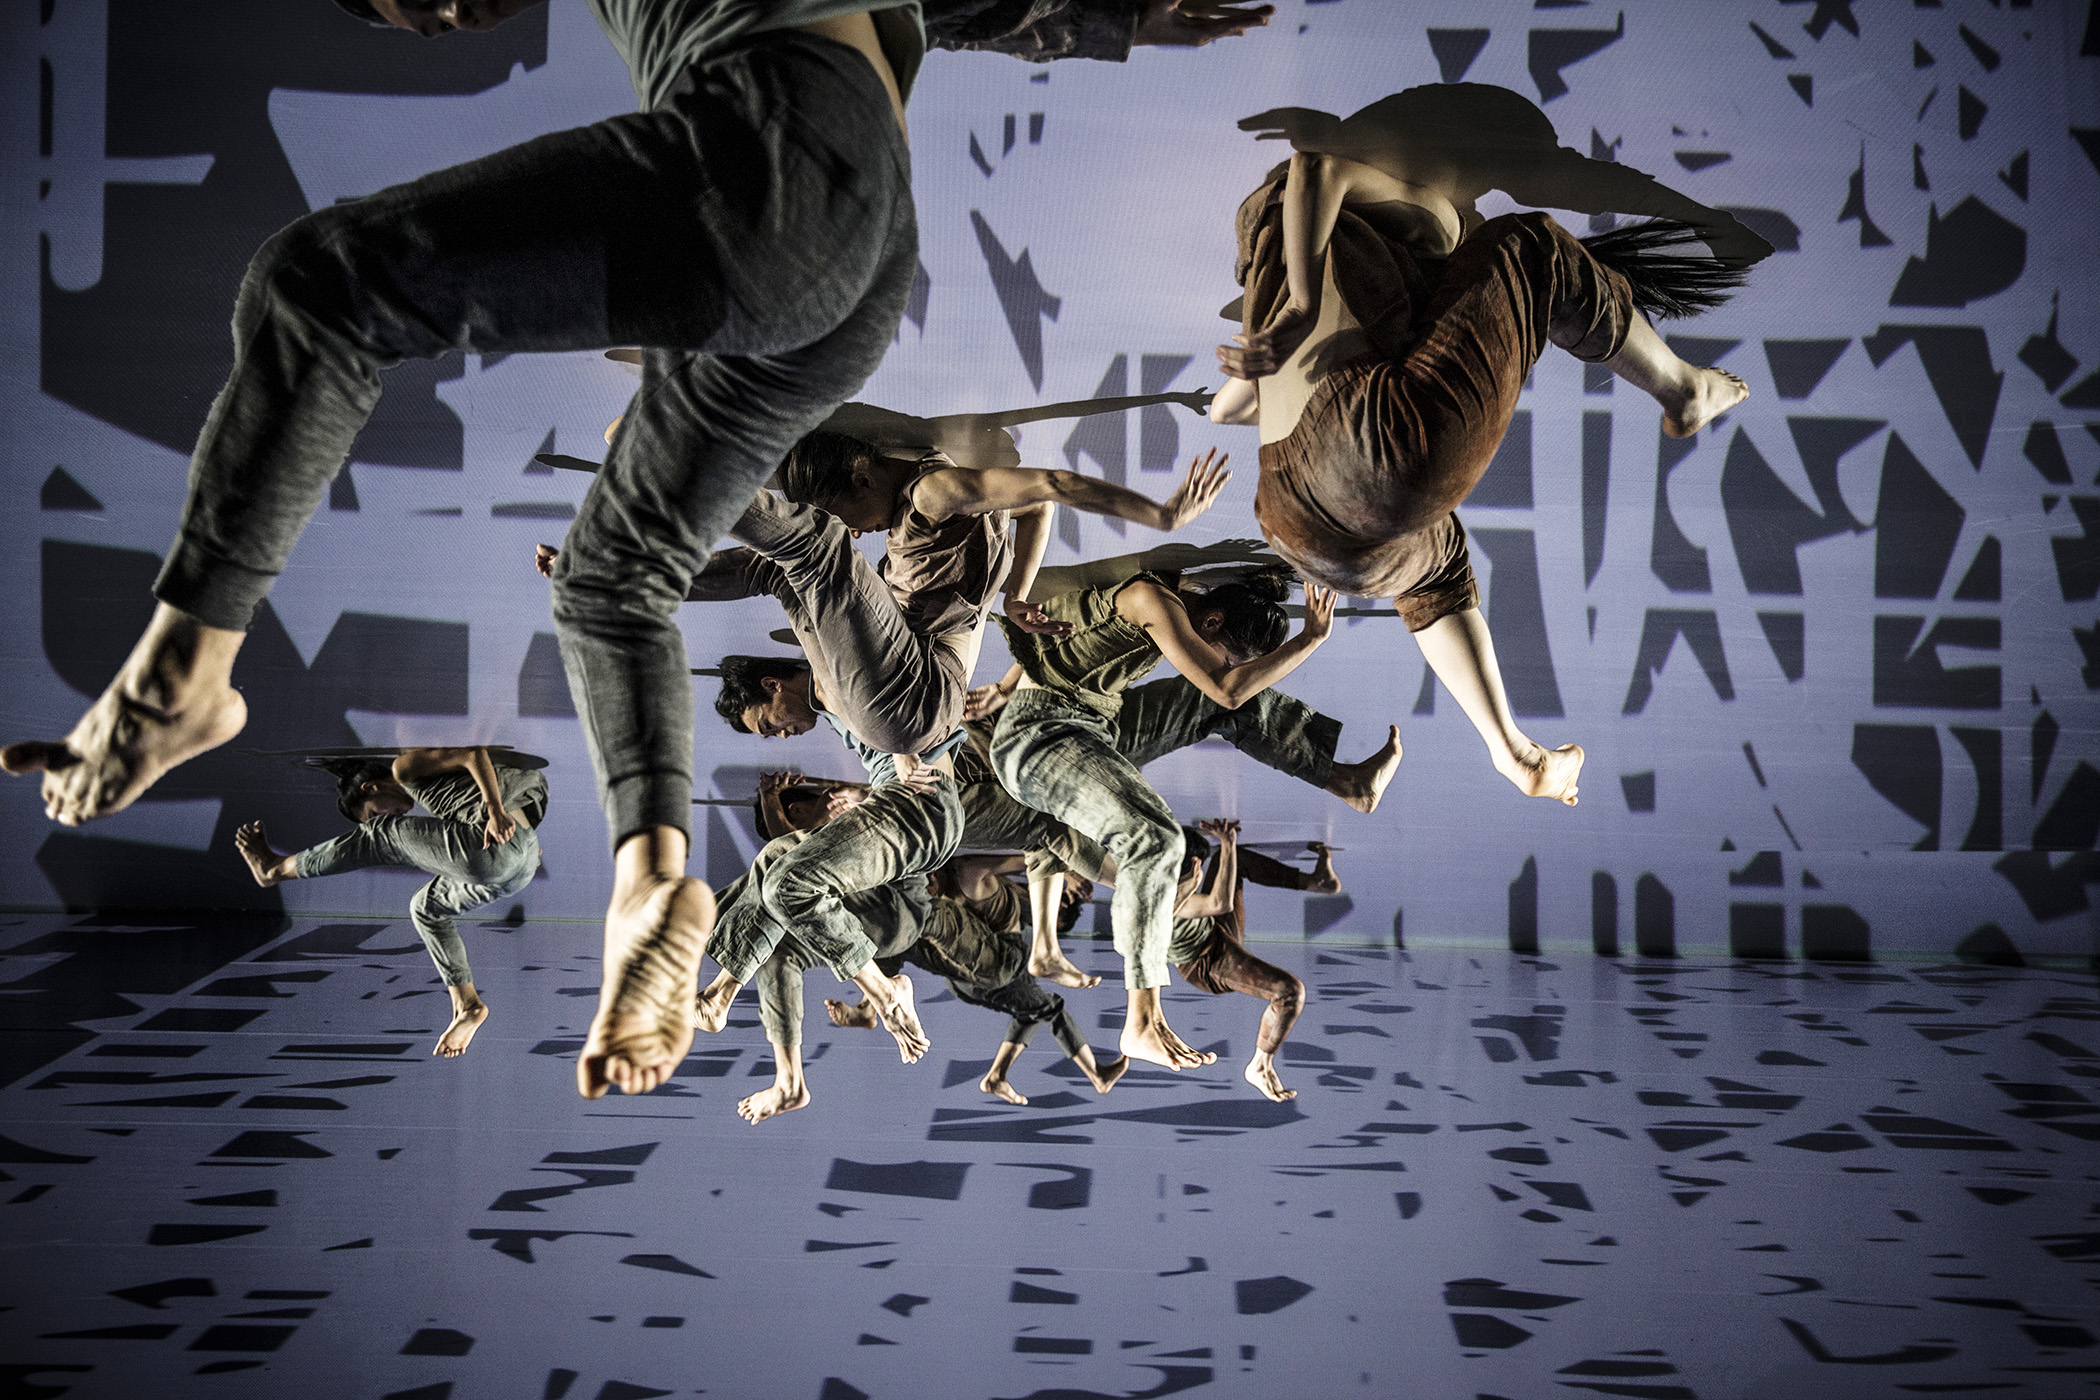 Cloud Gate named ‘outstanding company’ by UK dance awards